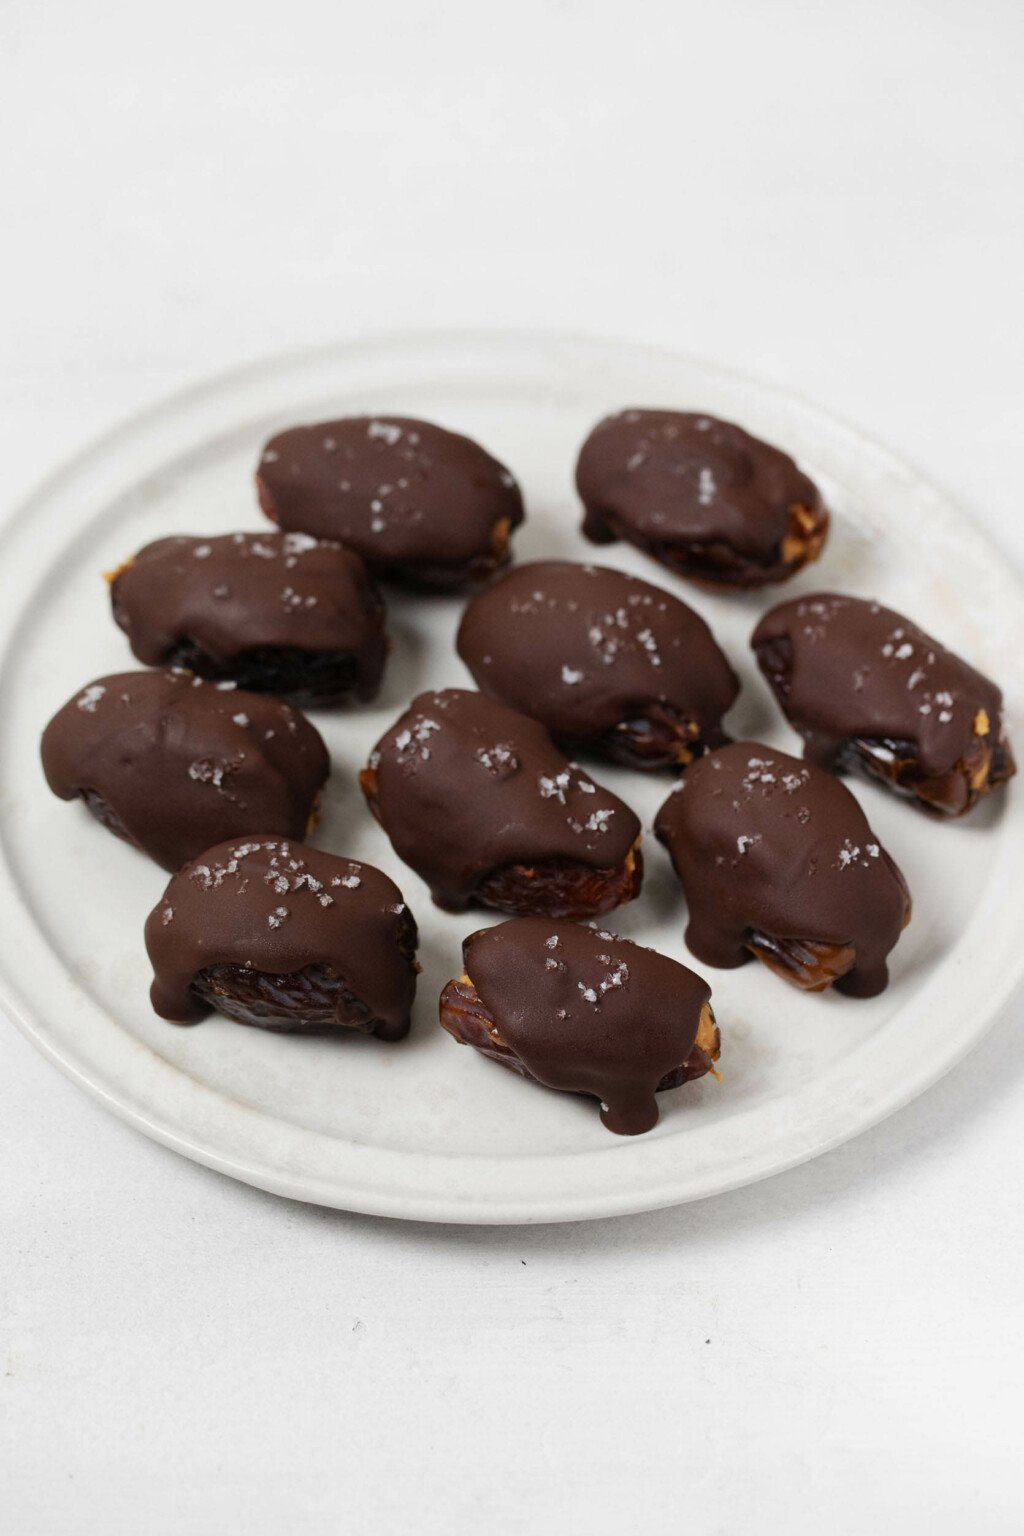 Medjool dates are lined up on a round white plate. They are all dipped in dark chocolate and sprinkled with sea salt.